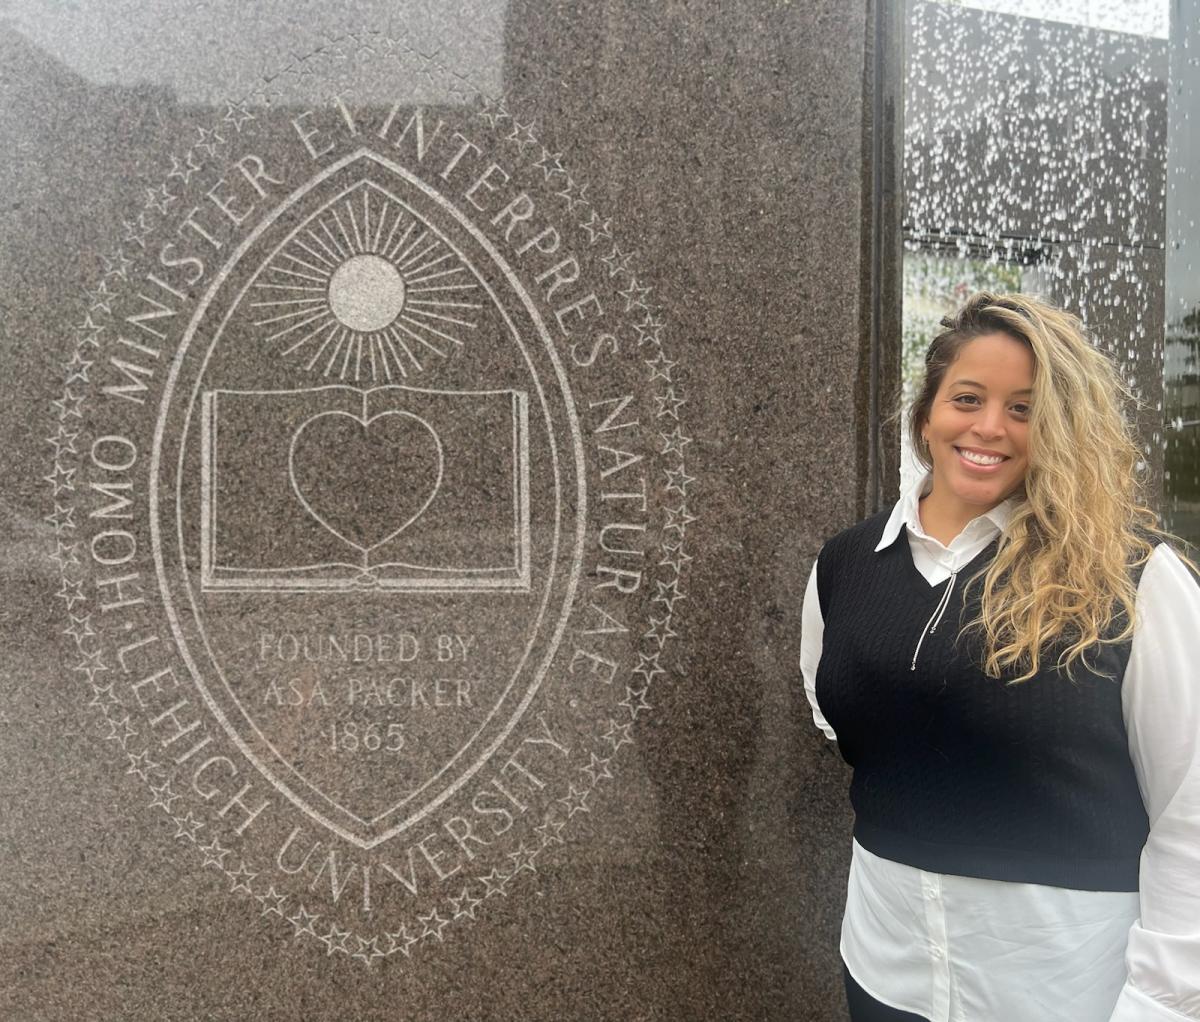 Talent Acquisition Specialist Felicia Cochrane smiles while standing next to the Lehigh fountain in front of the Alumni Memorial building